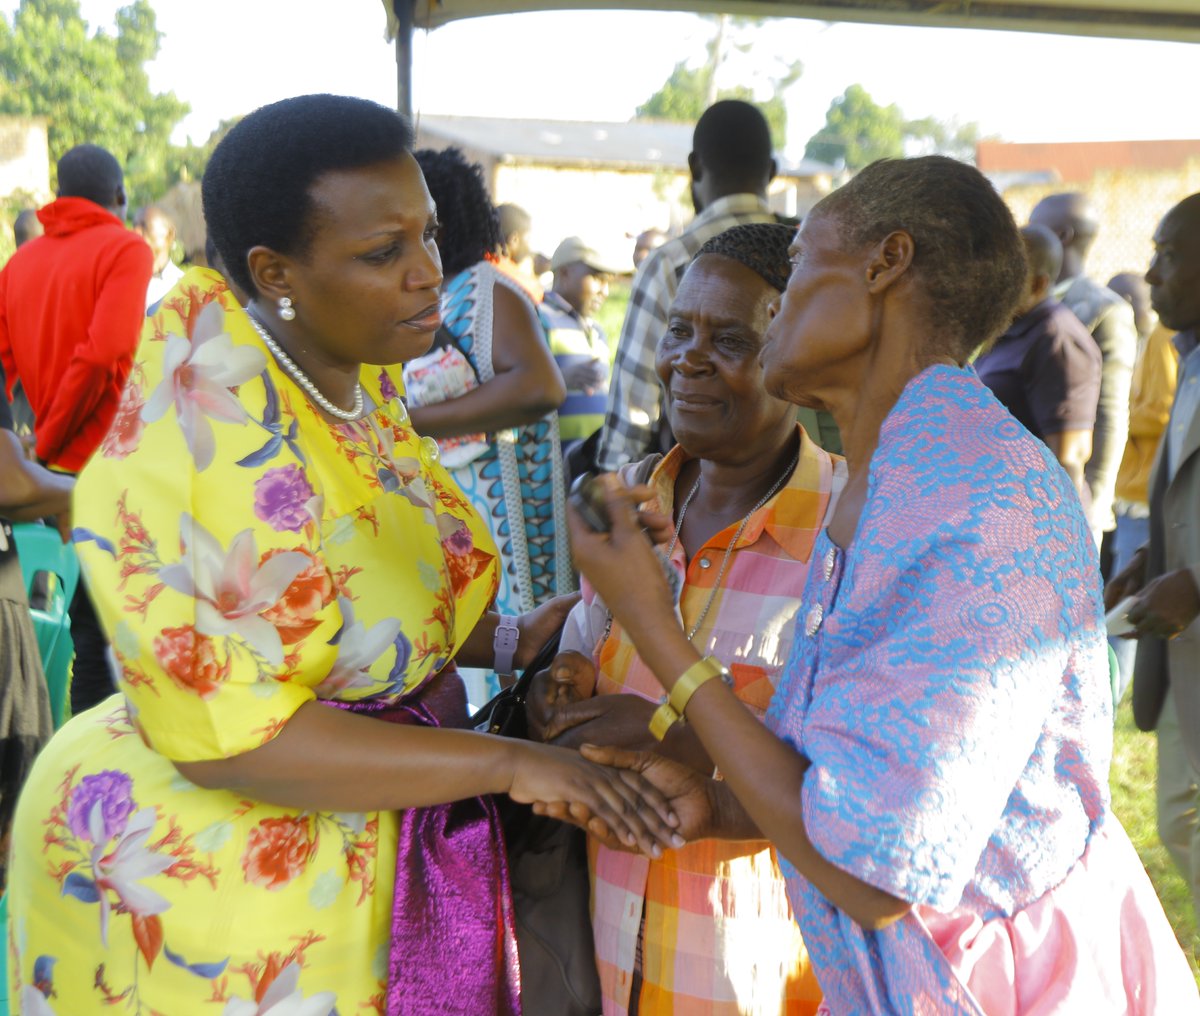 From nurturing families to preserving traditions, elderly women in our community play a vital role in shaping our society. 
I appreciate their invaluable contributions especially in Buikwe every day!
#ElderlyEmpowerment #CommunityLeaders